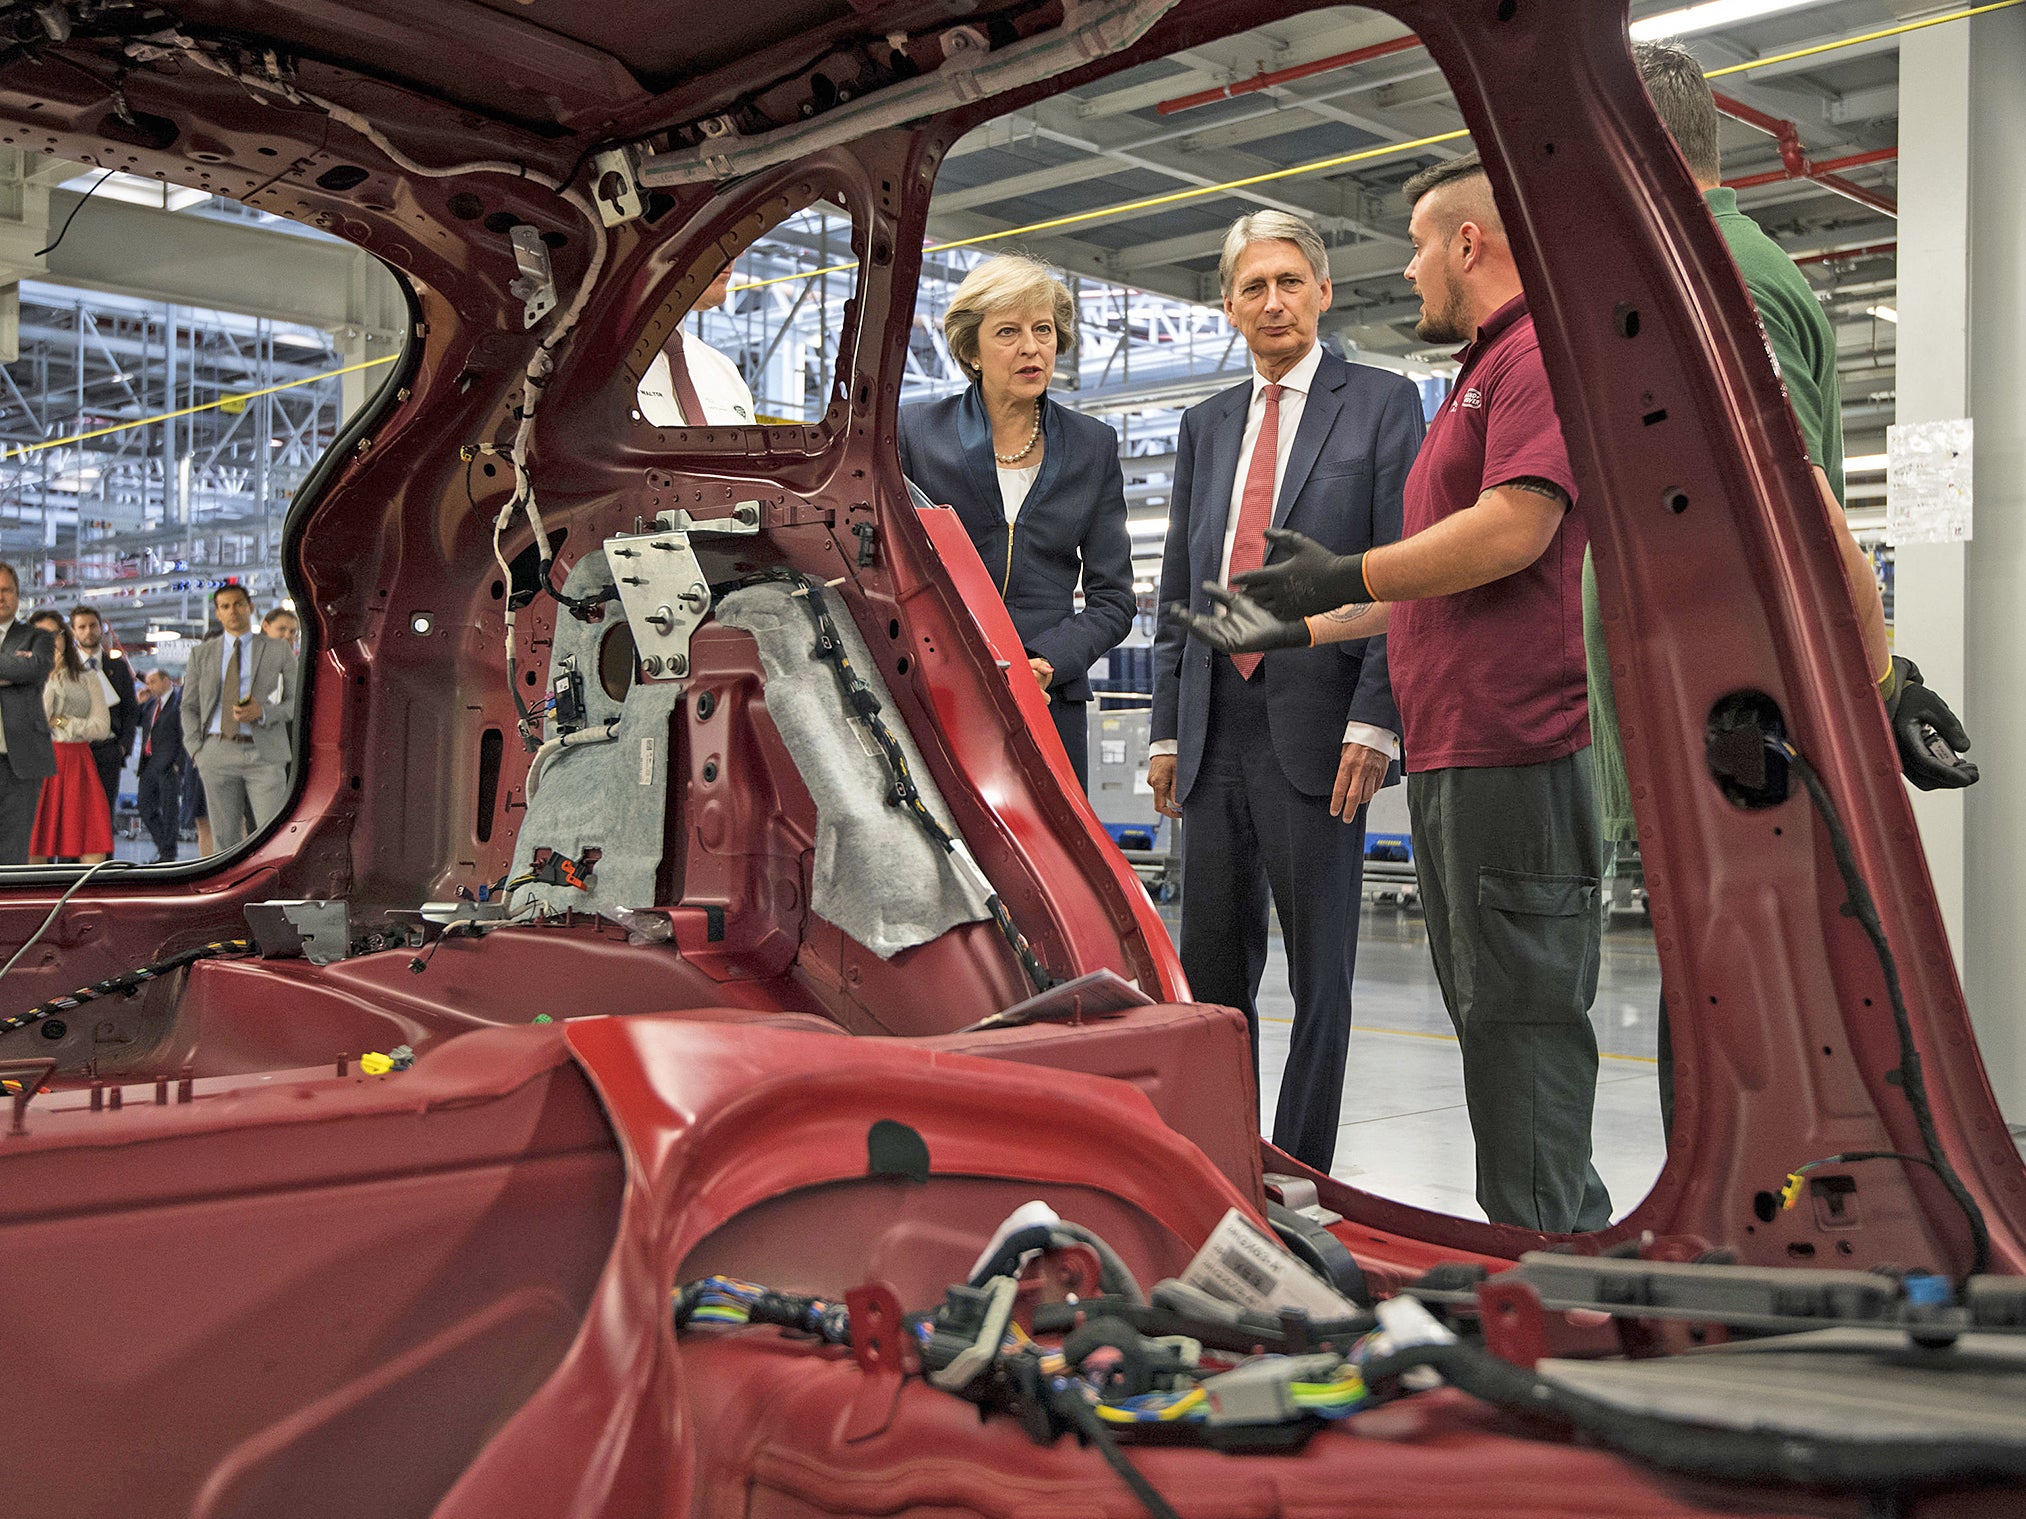 Theresa May and Philip Hammond view a car production line during a visit to the Jaguar Land Rover factory in Solihull